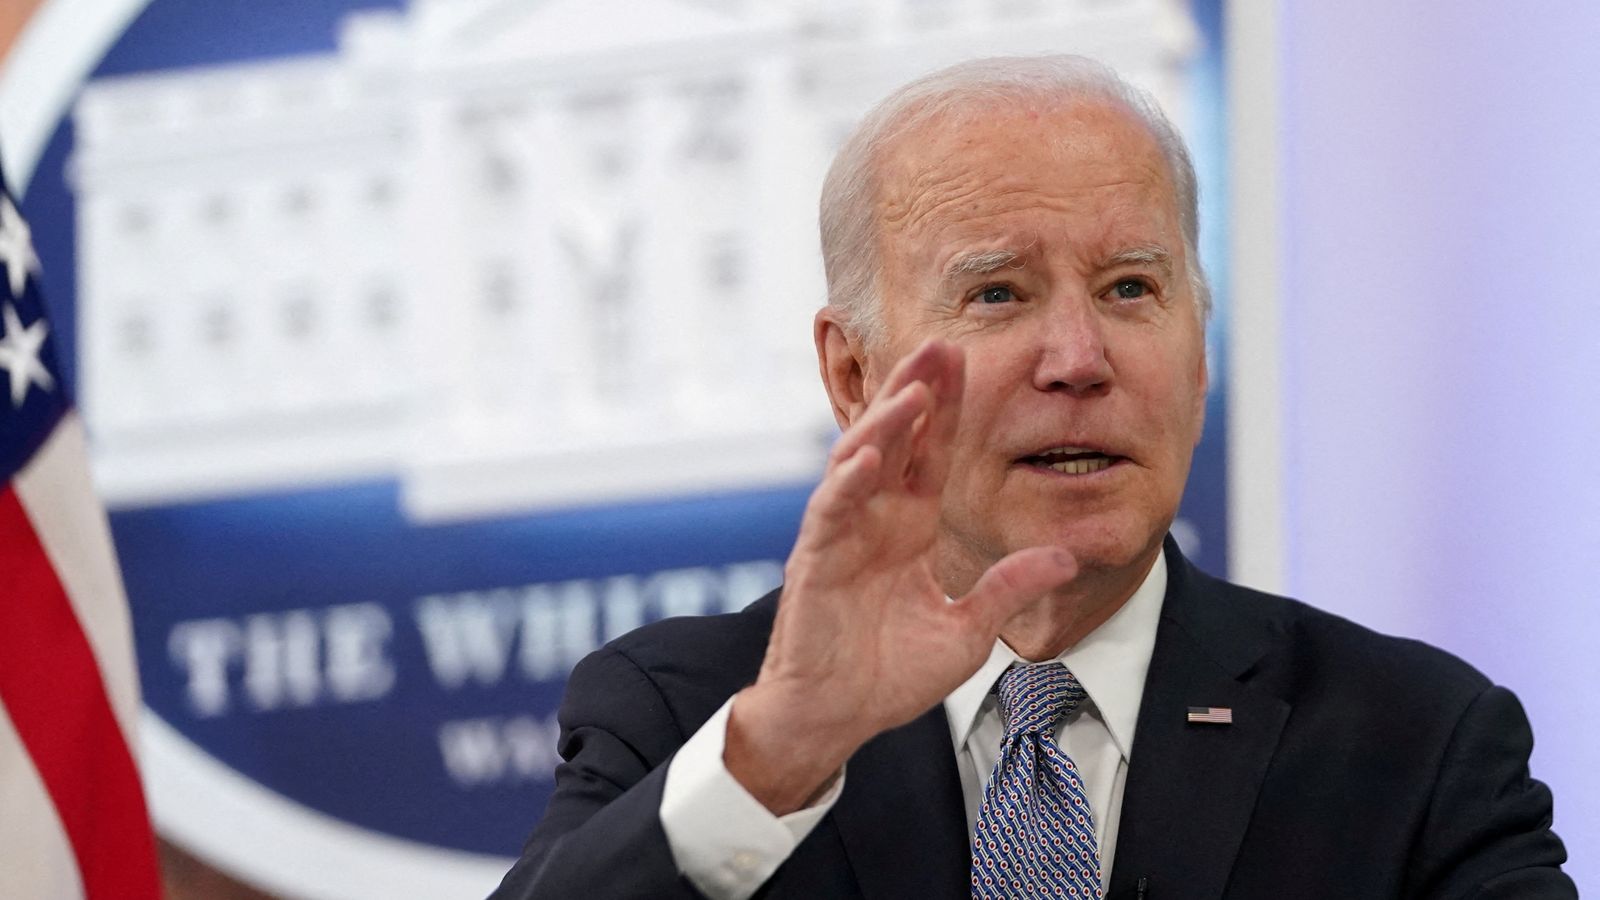 Joe Biden won't want to throw in the towel now - who wants to be a one-term president?